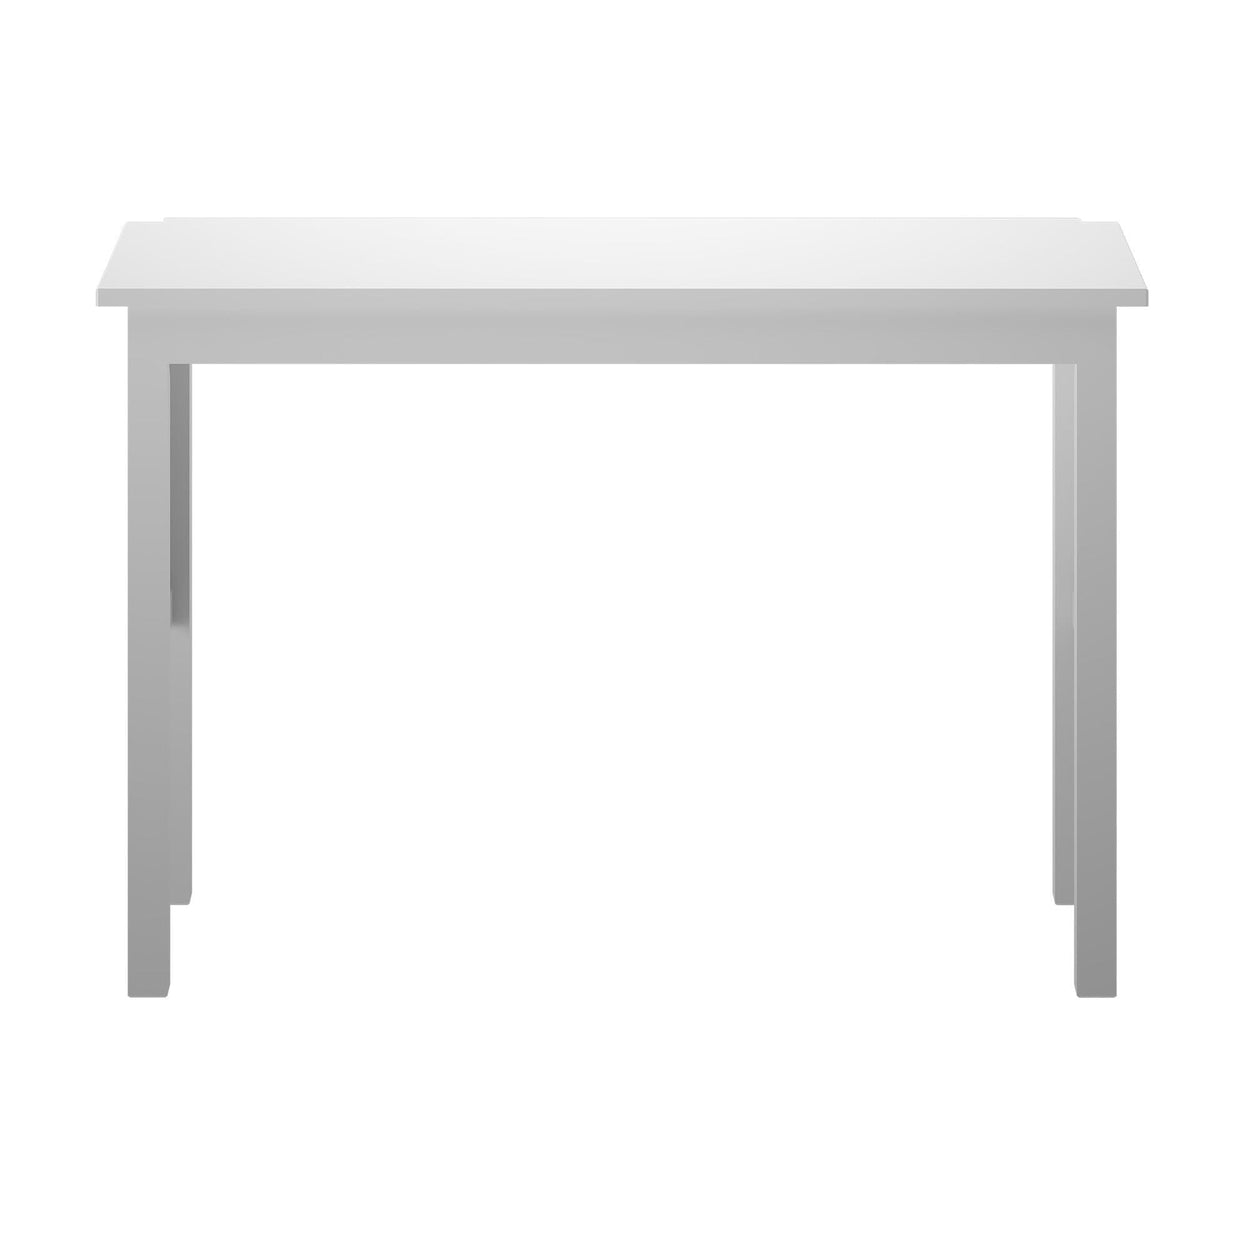 180219-002 : Component Desk For Twin-Size High Loft Bed, White